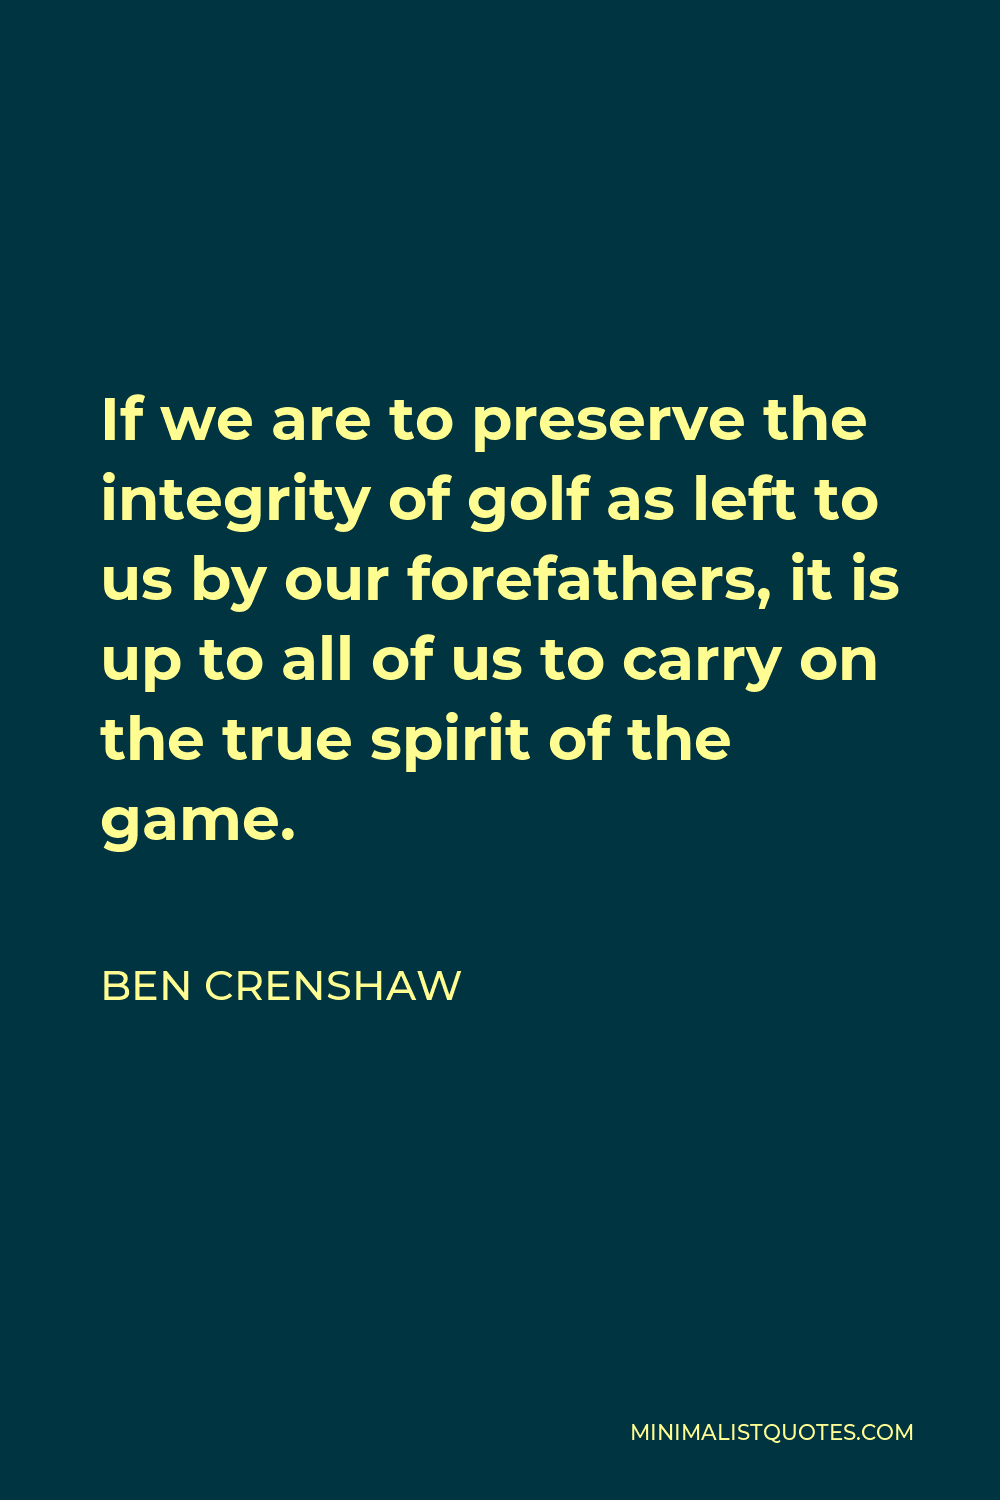 Ben Crenshaw Quote - If we are to preserve the integrity of golf as left to us by our forefathers, it is up to all of us to carry on the true spirit of the game.